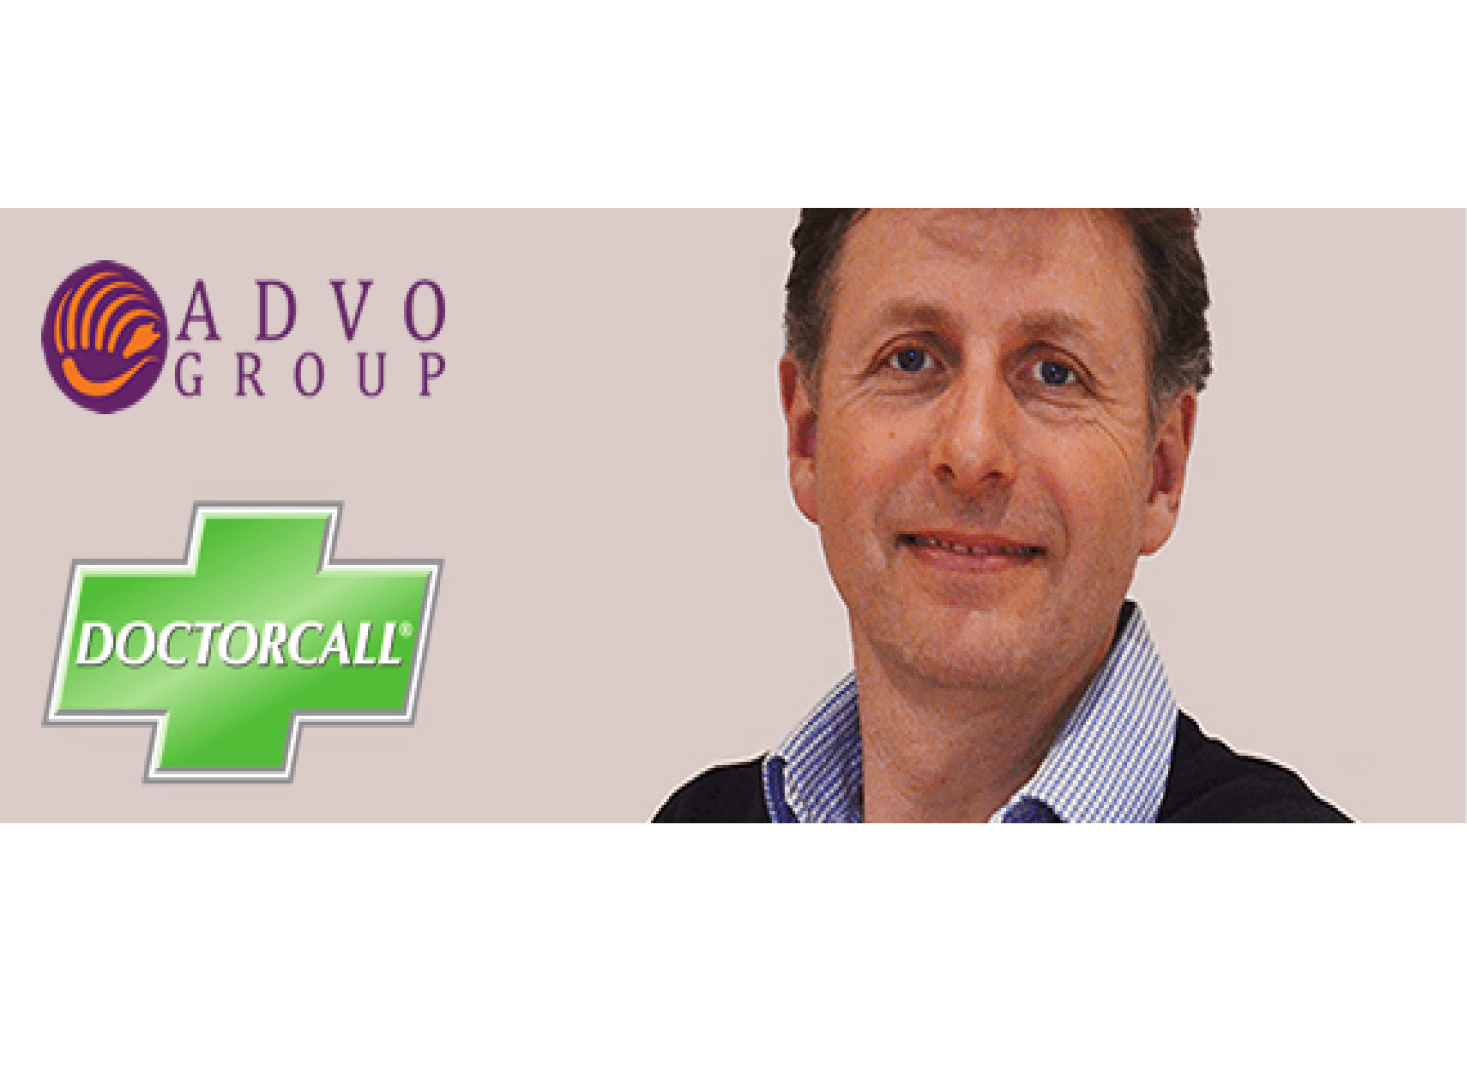 Advo Group Interview Doctorcall CEO and Medical Director Dr Charles Levinson